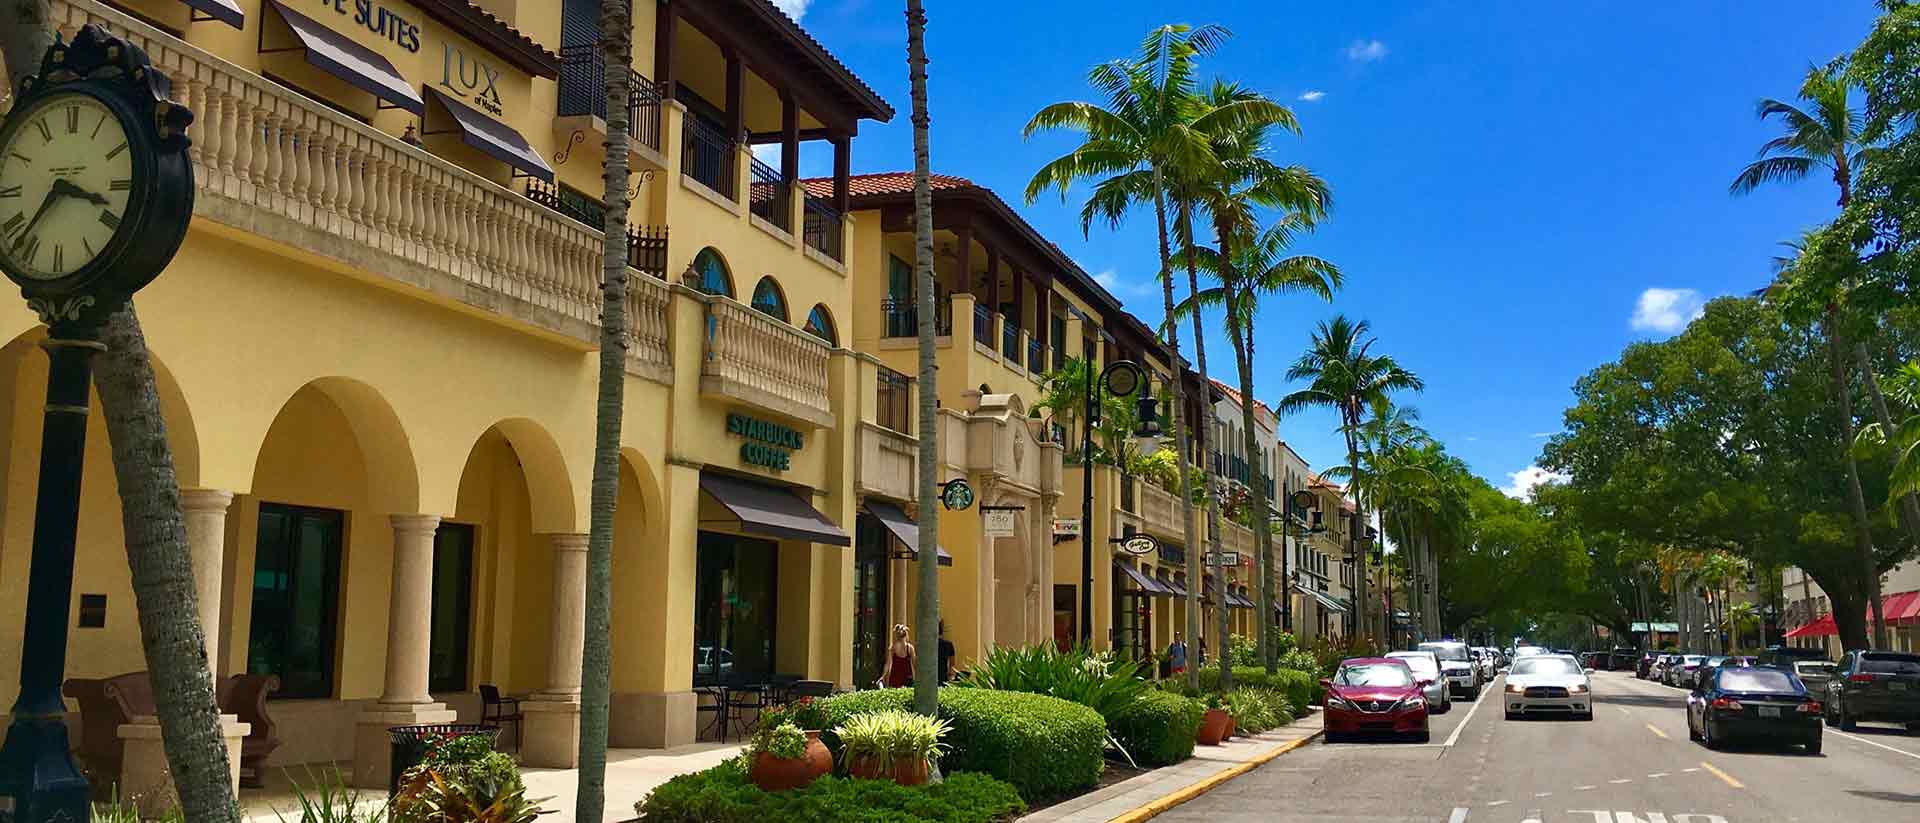 Luxury shops on 5th Avenue in Olde Naples, Florida